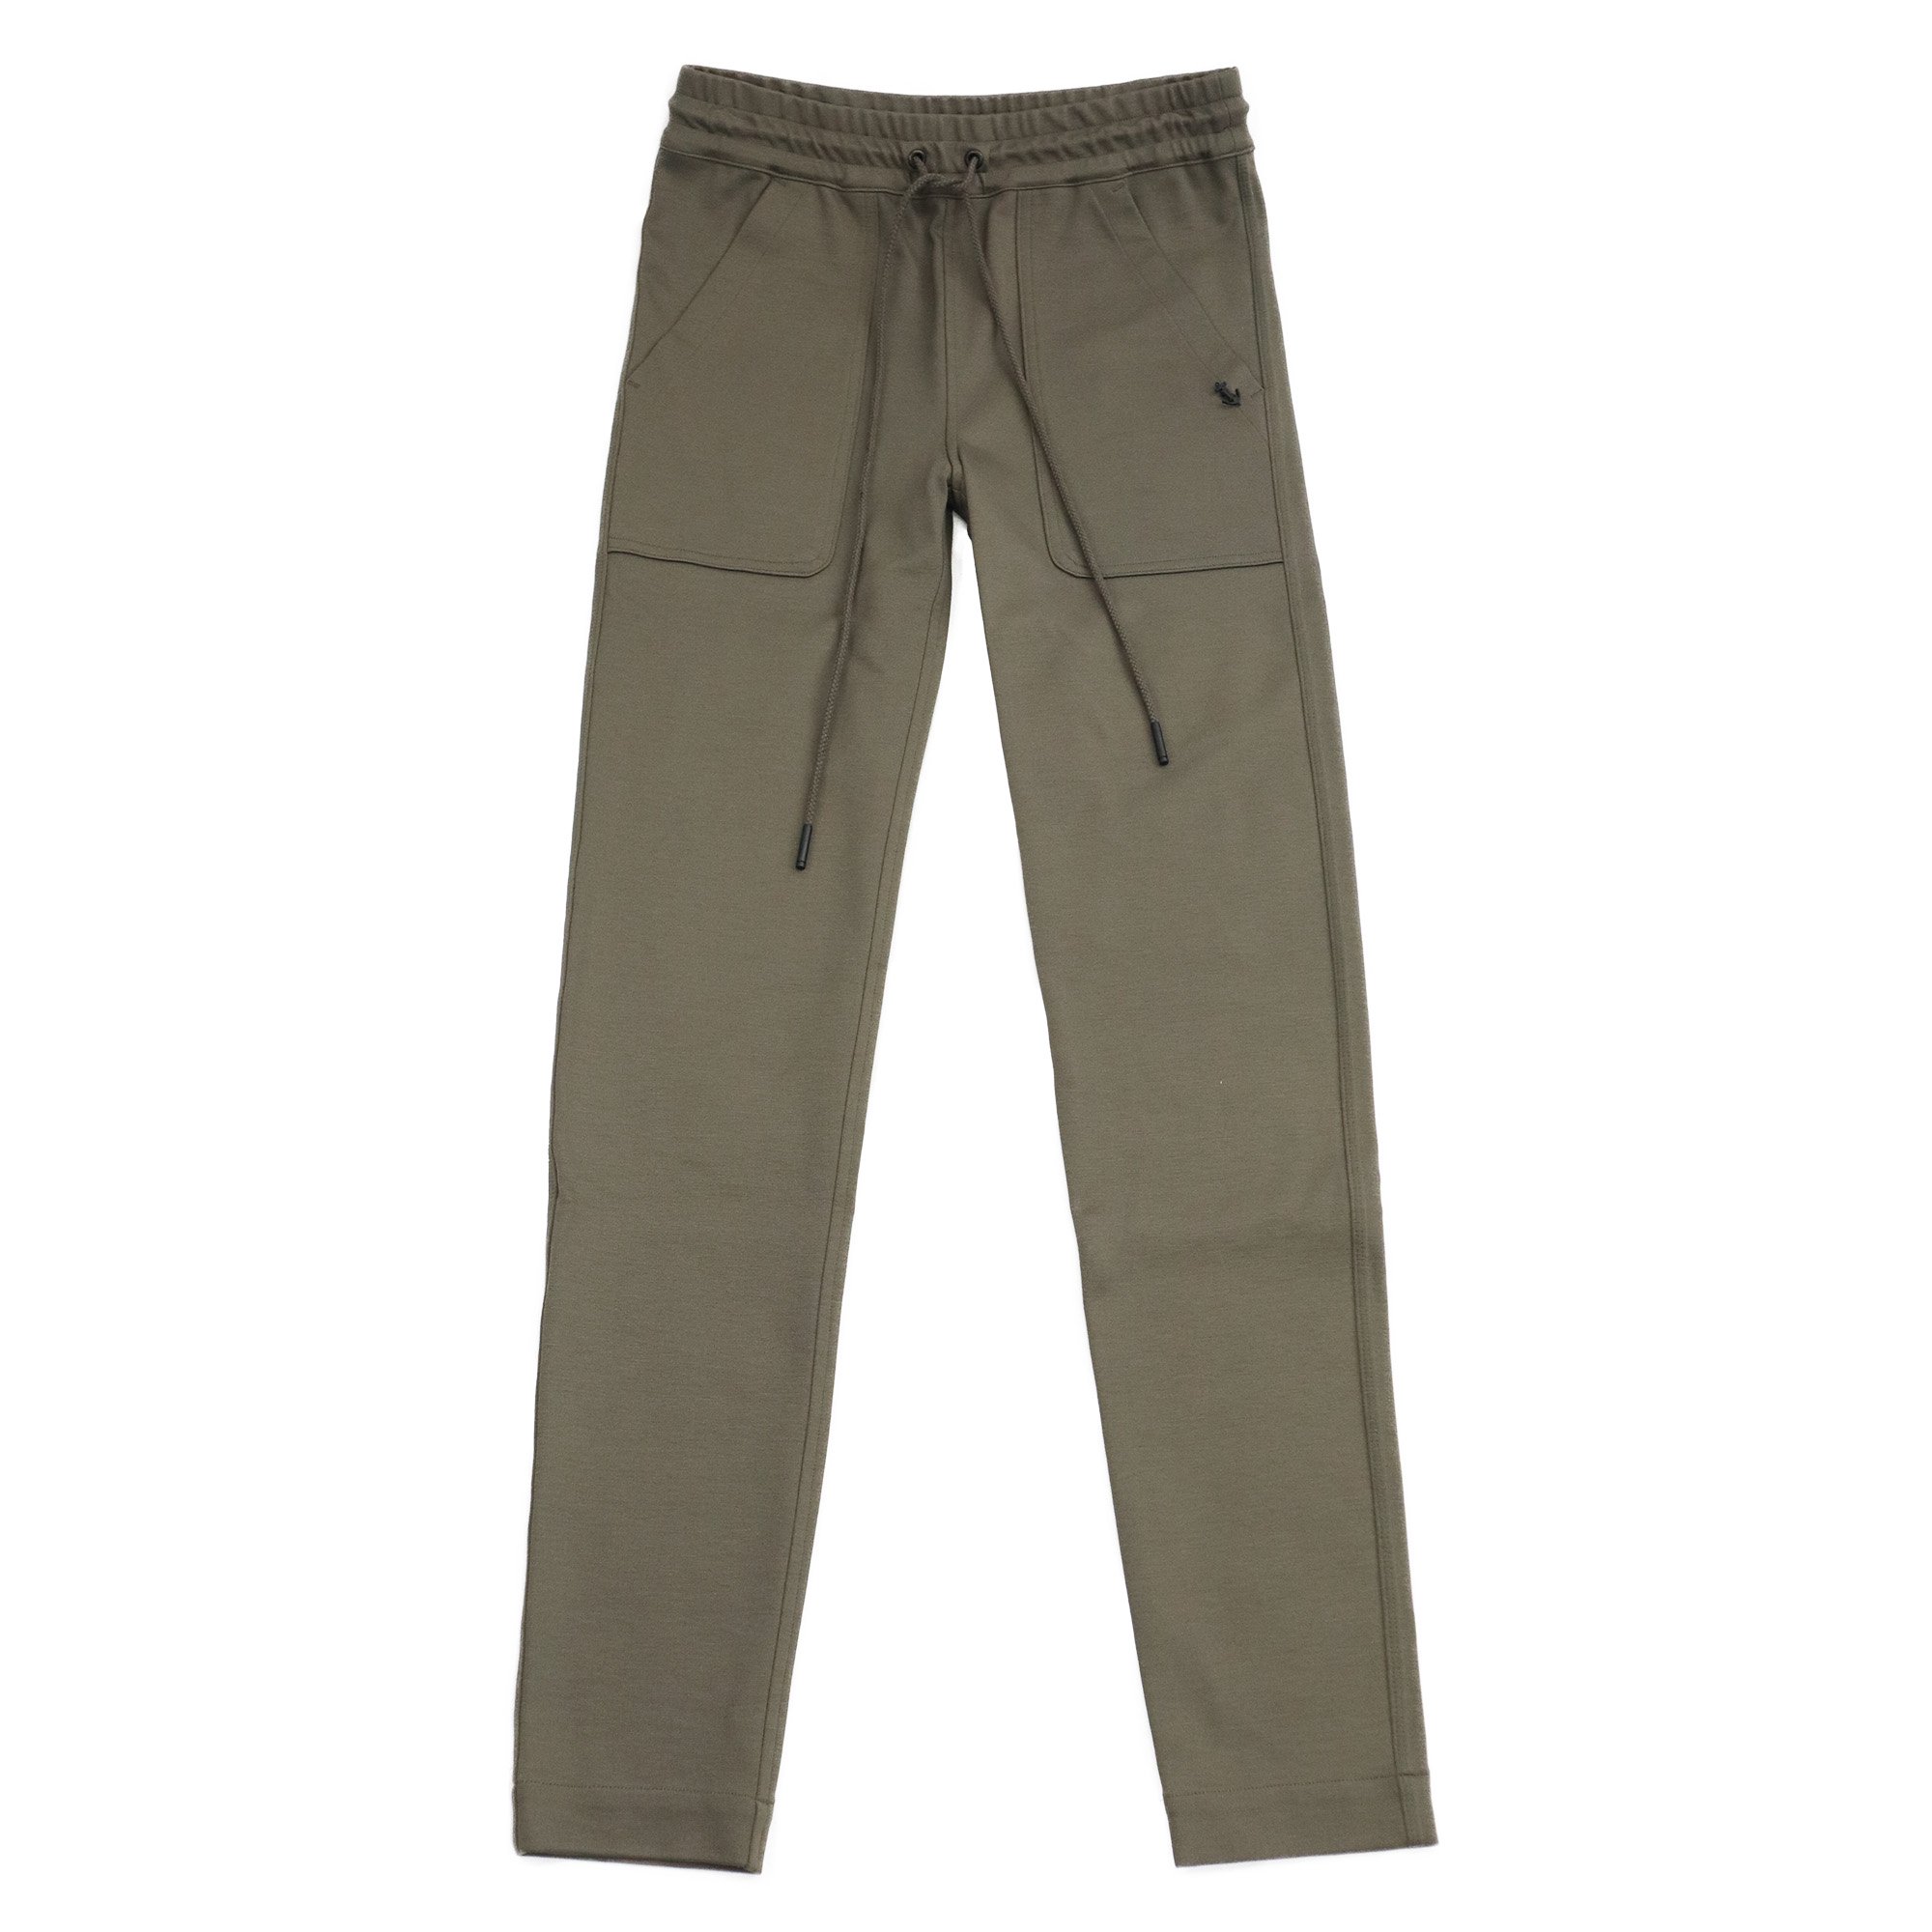 <img class='new_mark_img1' src='https://img.shop-pro.jp/img/new/icons6.gif' style='border:none;display:inline;margin:0px;padding:0px;width:auto;' />THE RERACS PANTS【KHAKI】